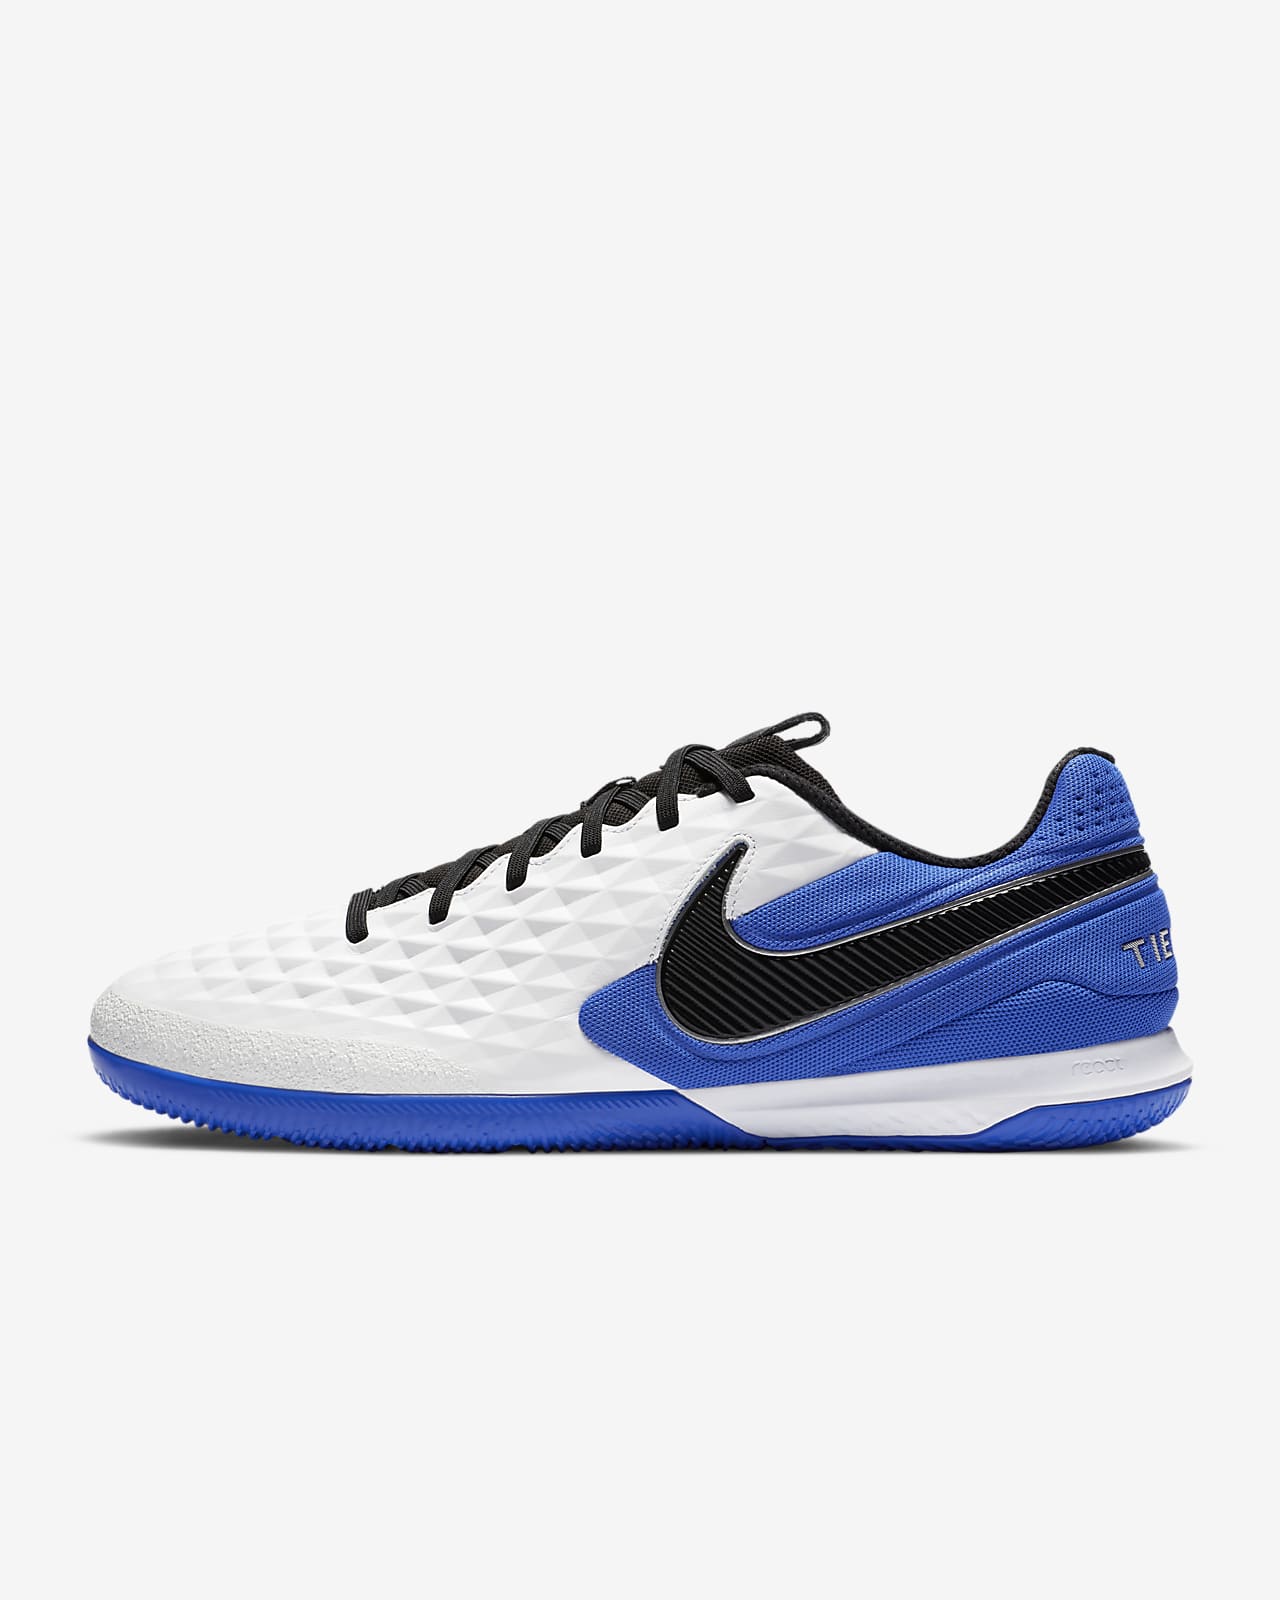 chaussure nike foot salle